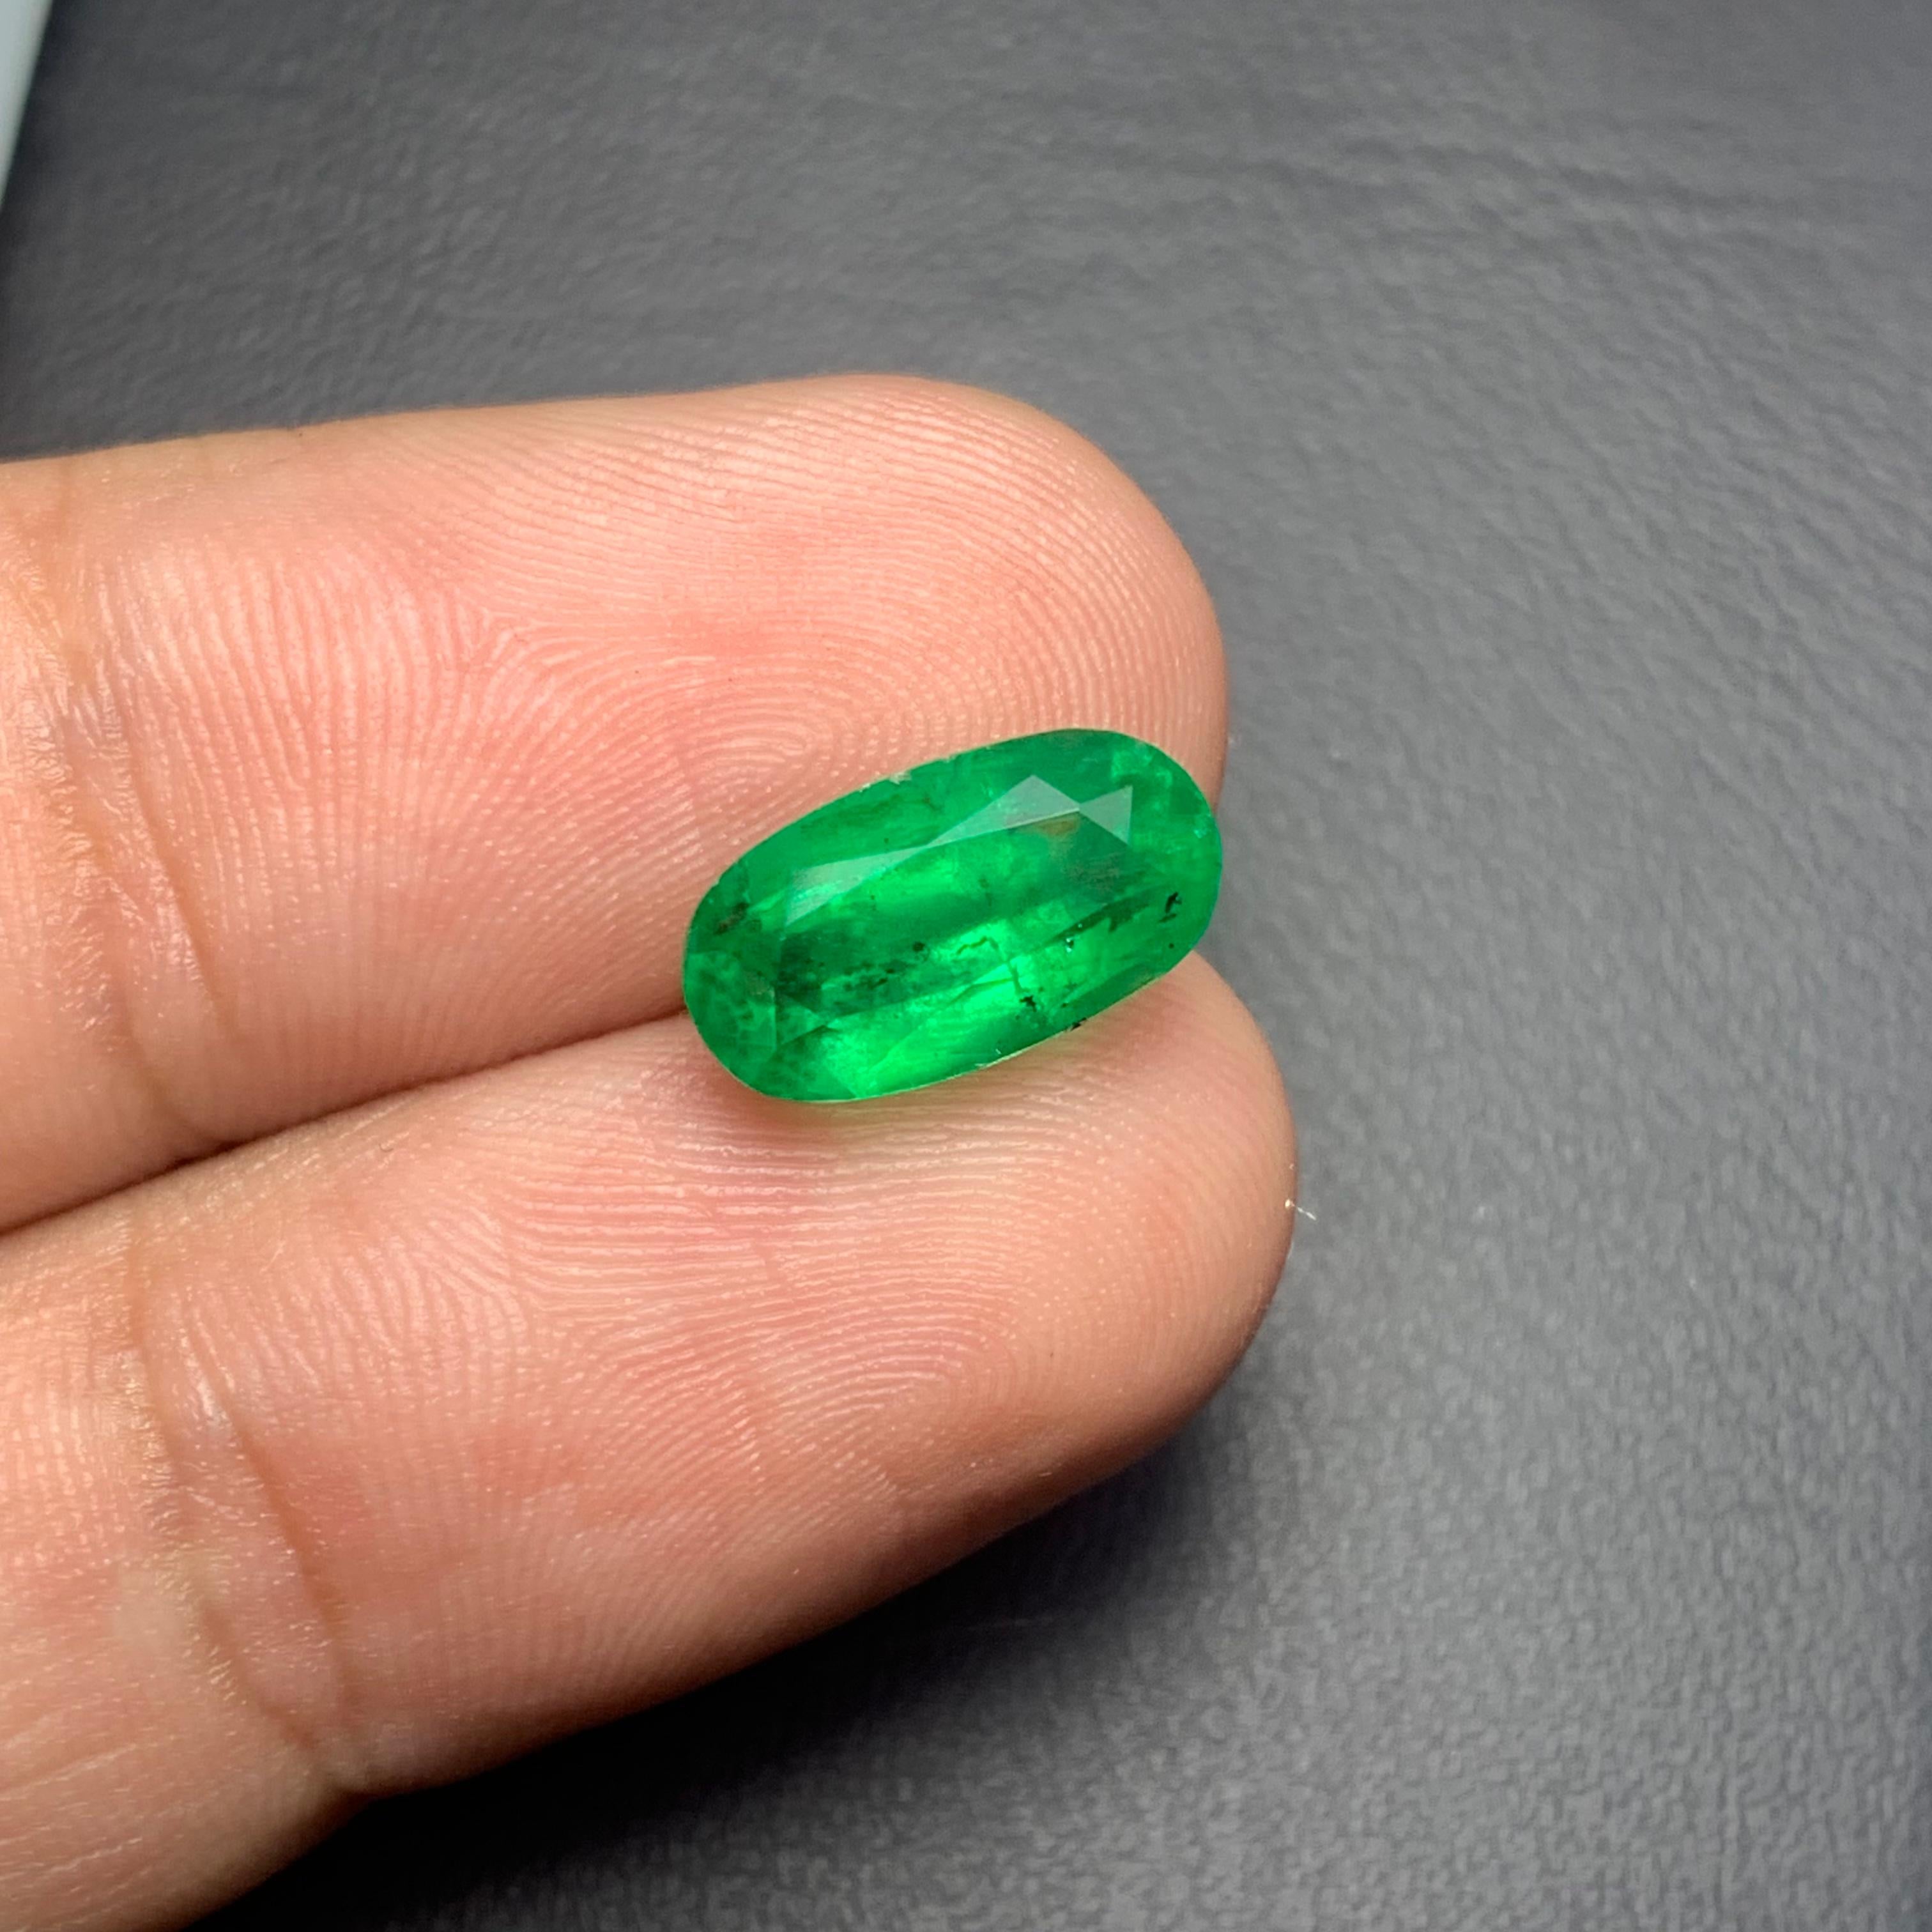 Oval Cut Gorgeous Natural Vivid Green Emerald Oval Shape from Pakistan Mine 3.10 Carat